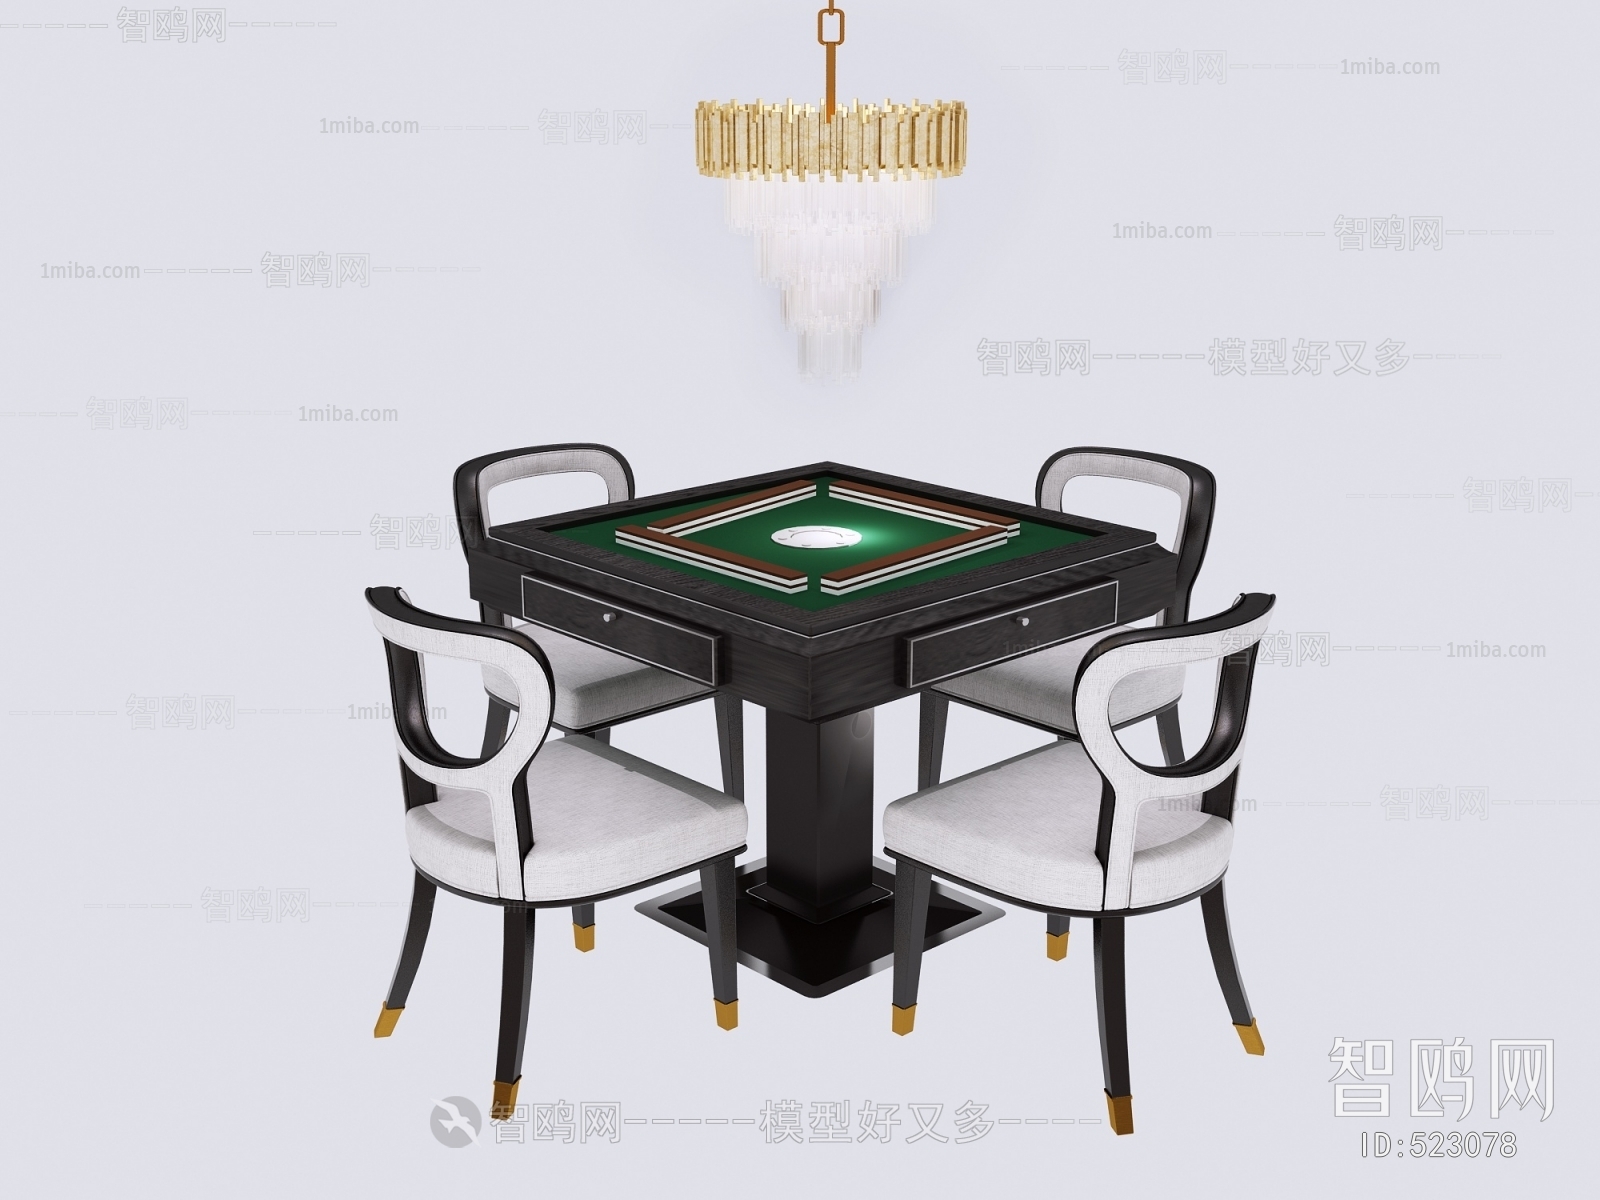 New Chinese Style Mahjong Tables And Chairs